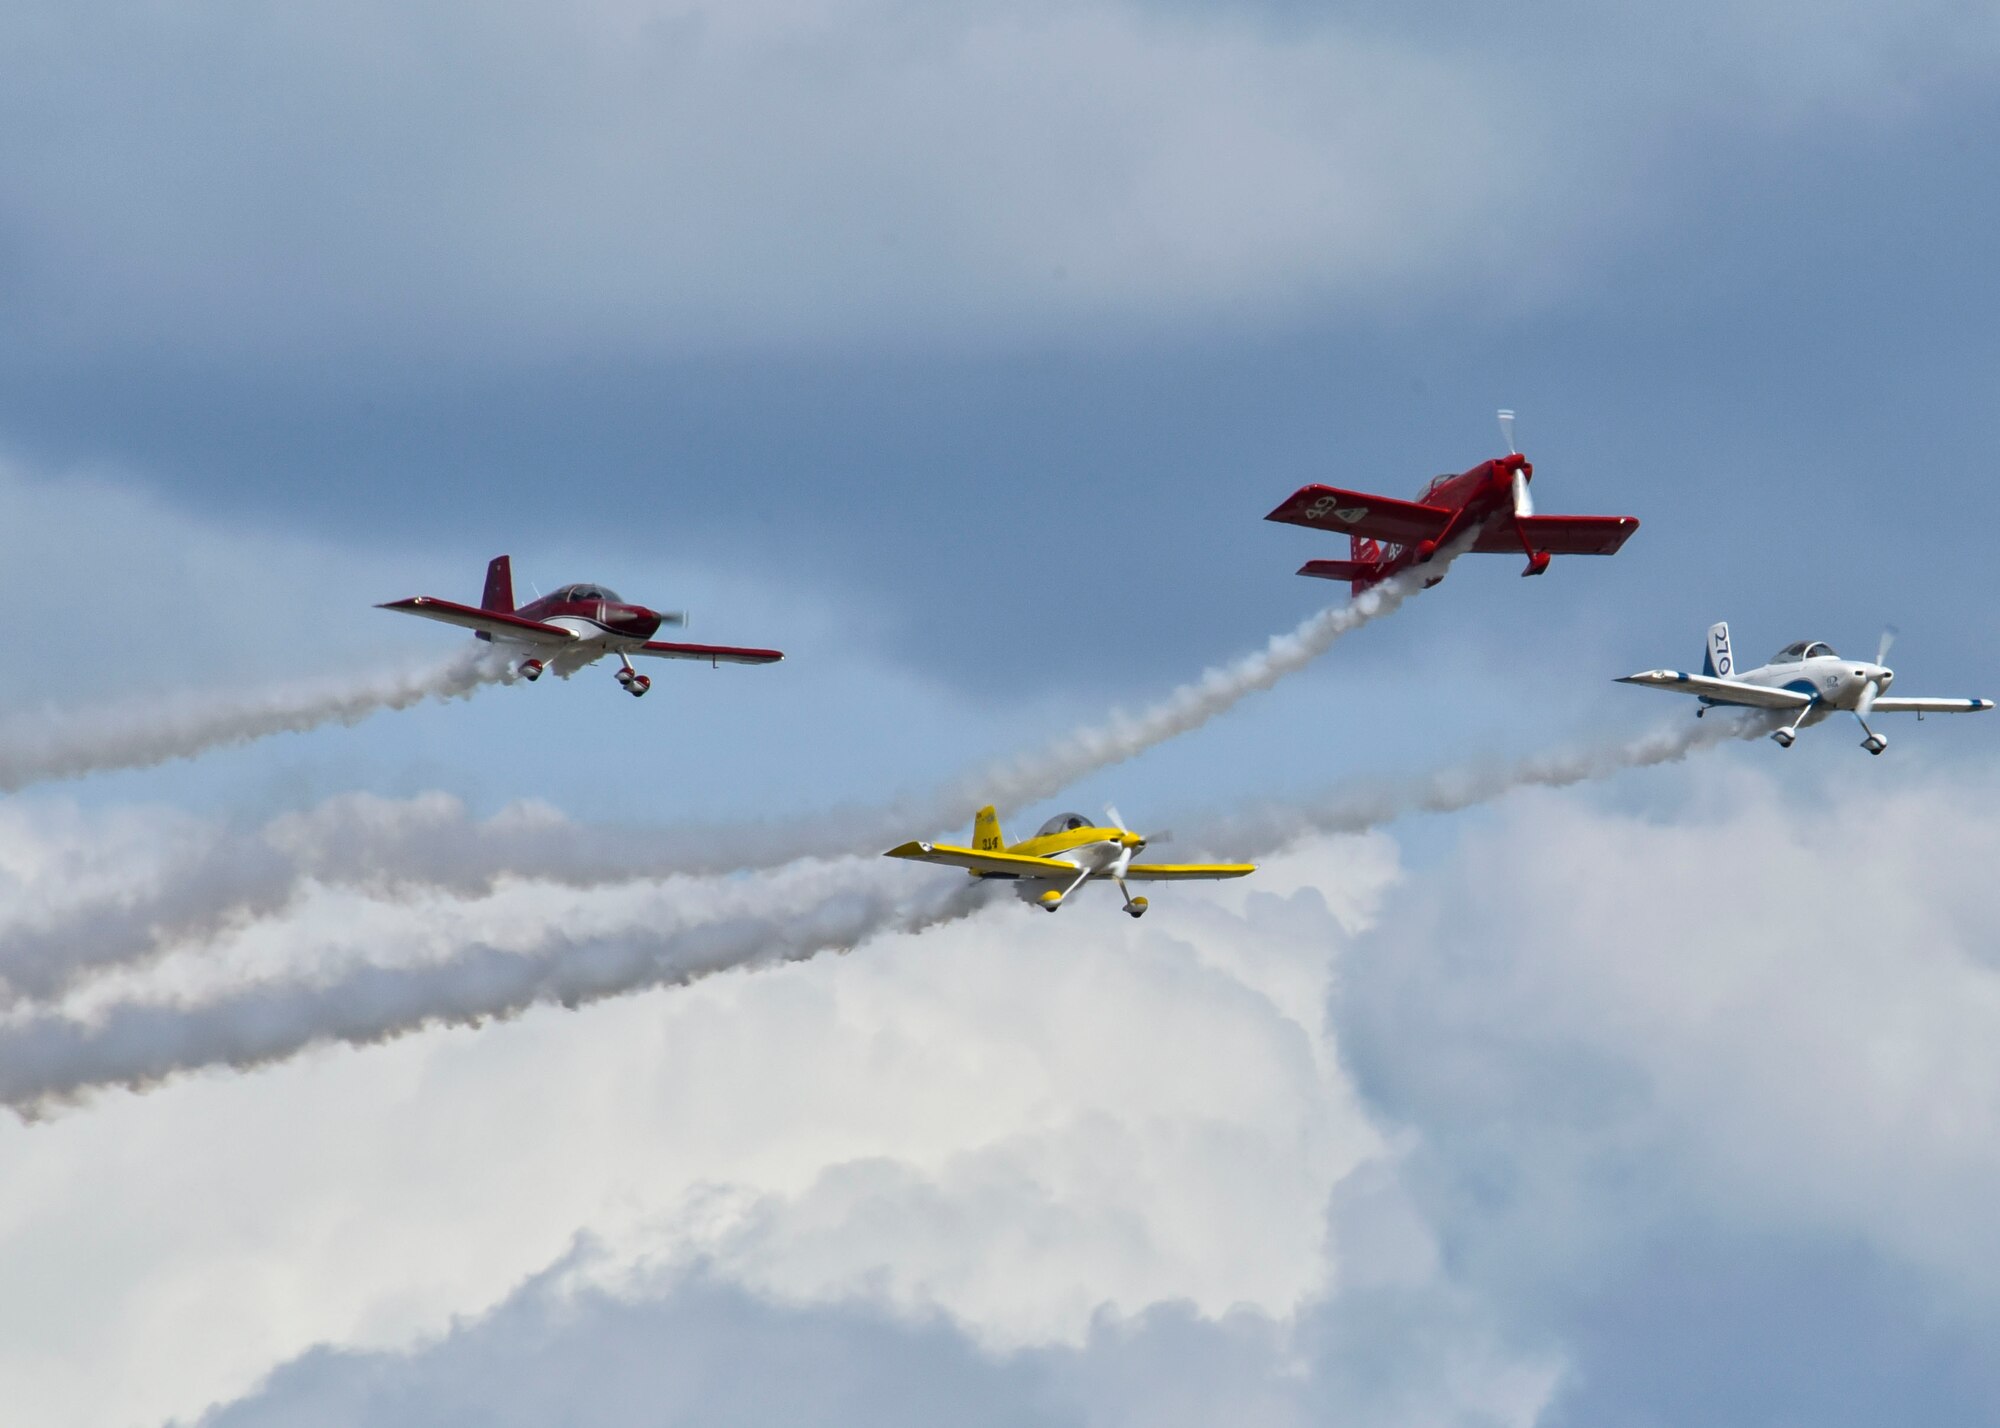 The Lightning Formation Airshows demonstration team performs an aerial demonstration as the final performer for the 2019 Skyfest Open House and Airshow  on Fairchild Air Force Base, Washington, June 22, 2019. Skyfest 2019 offered a unique view of Team Fairchild’s role in enabling Rapid Global Mobility for the U.S. Air Force. The show featured more than 13 aerial acts and 16 static display aircraft, as well as other attractions and displays. (U.S. Air Force photo by Airman Kiaundra Miller)